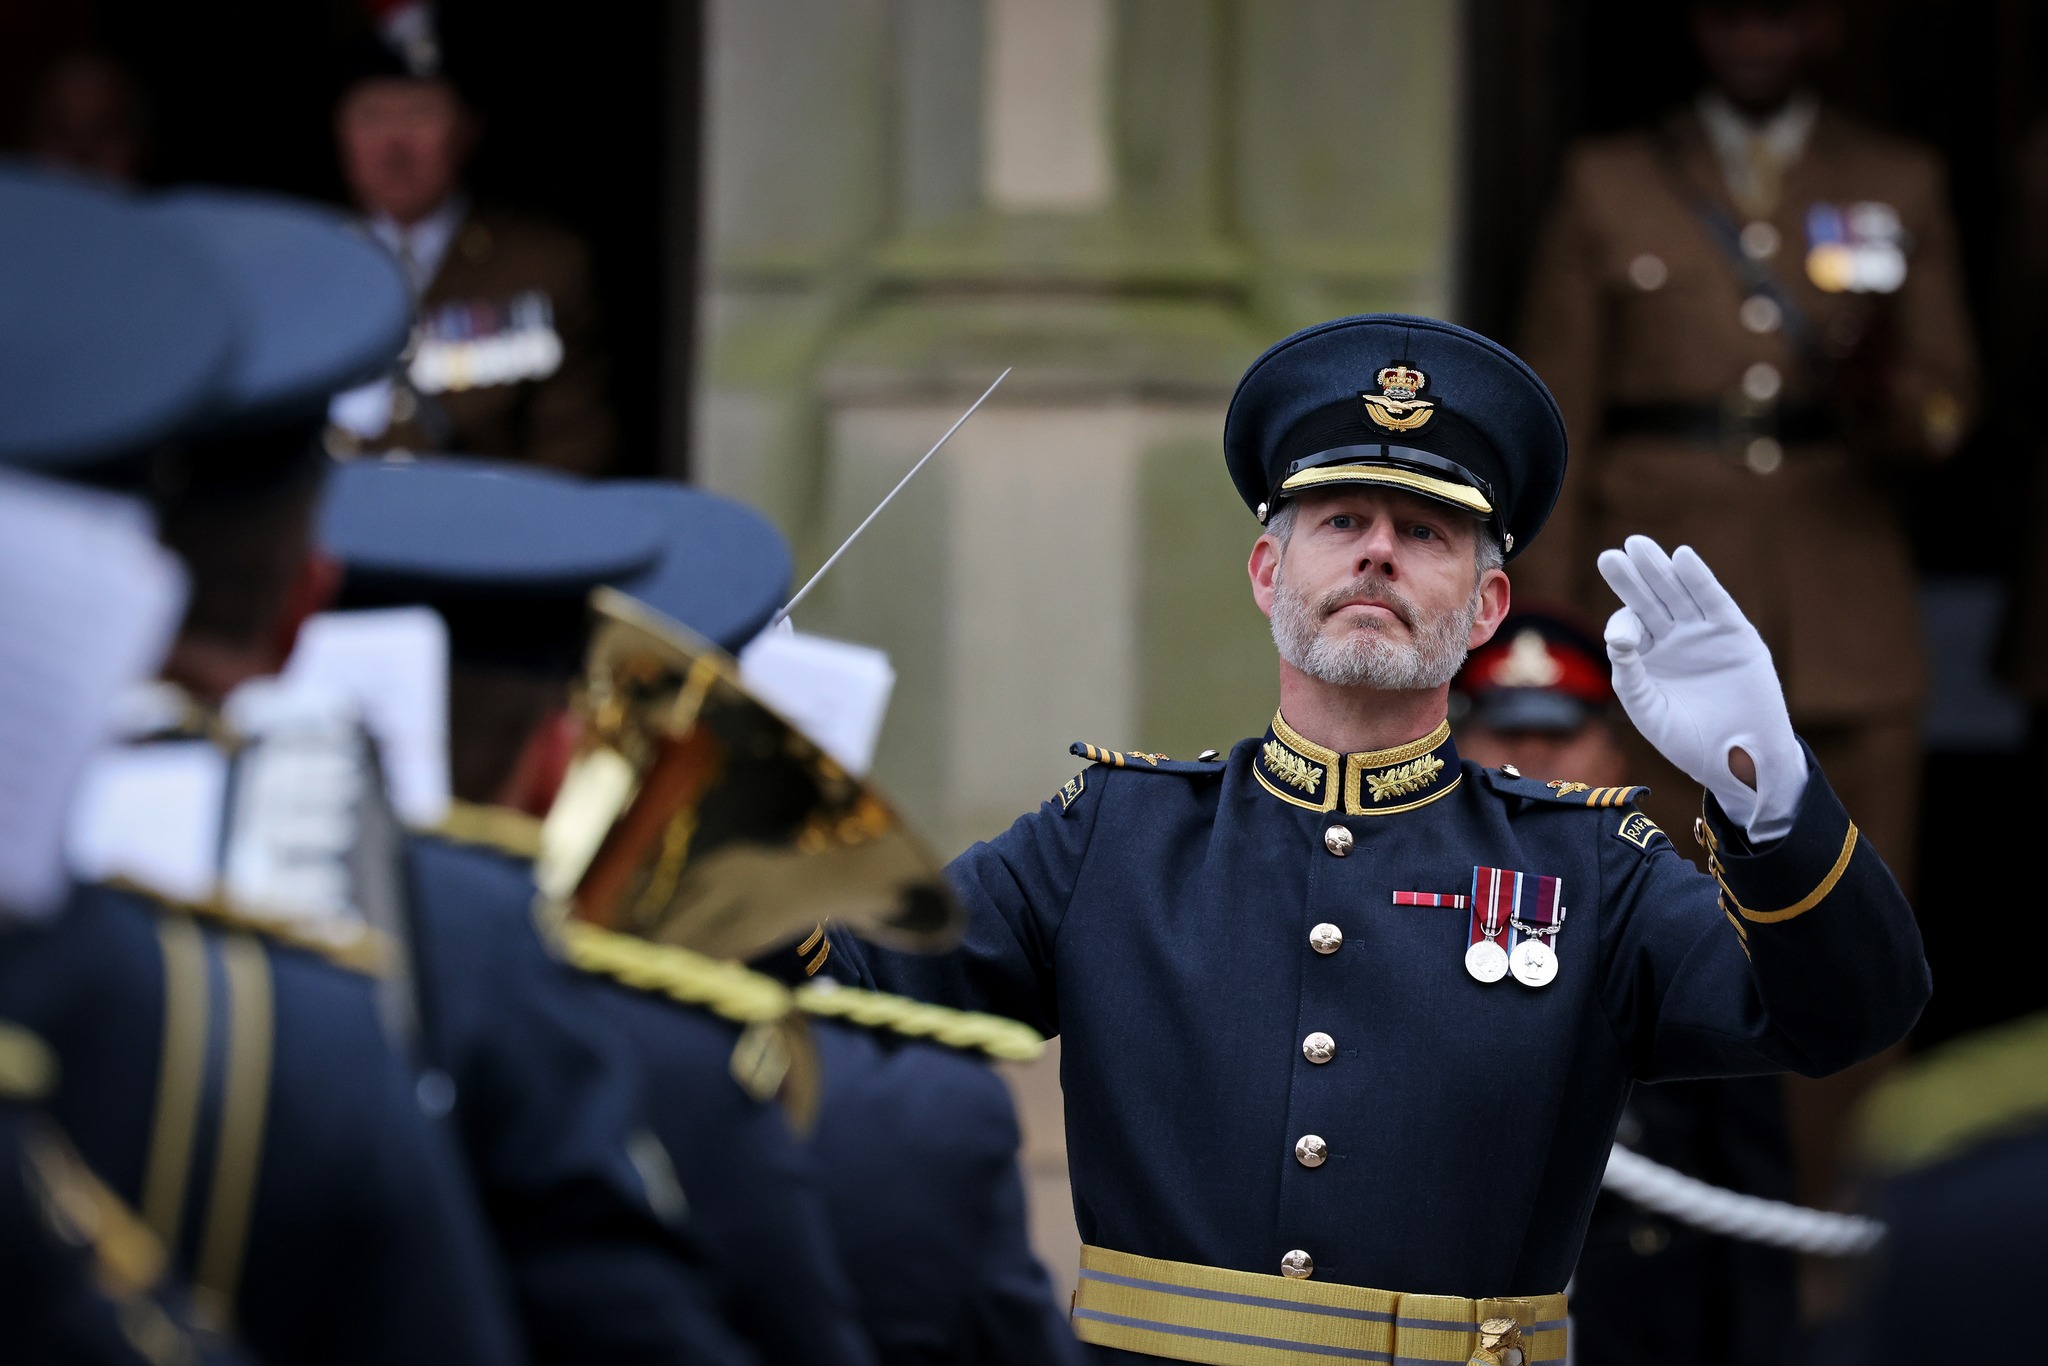 RAF Musician conducts the Band.